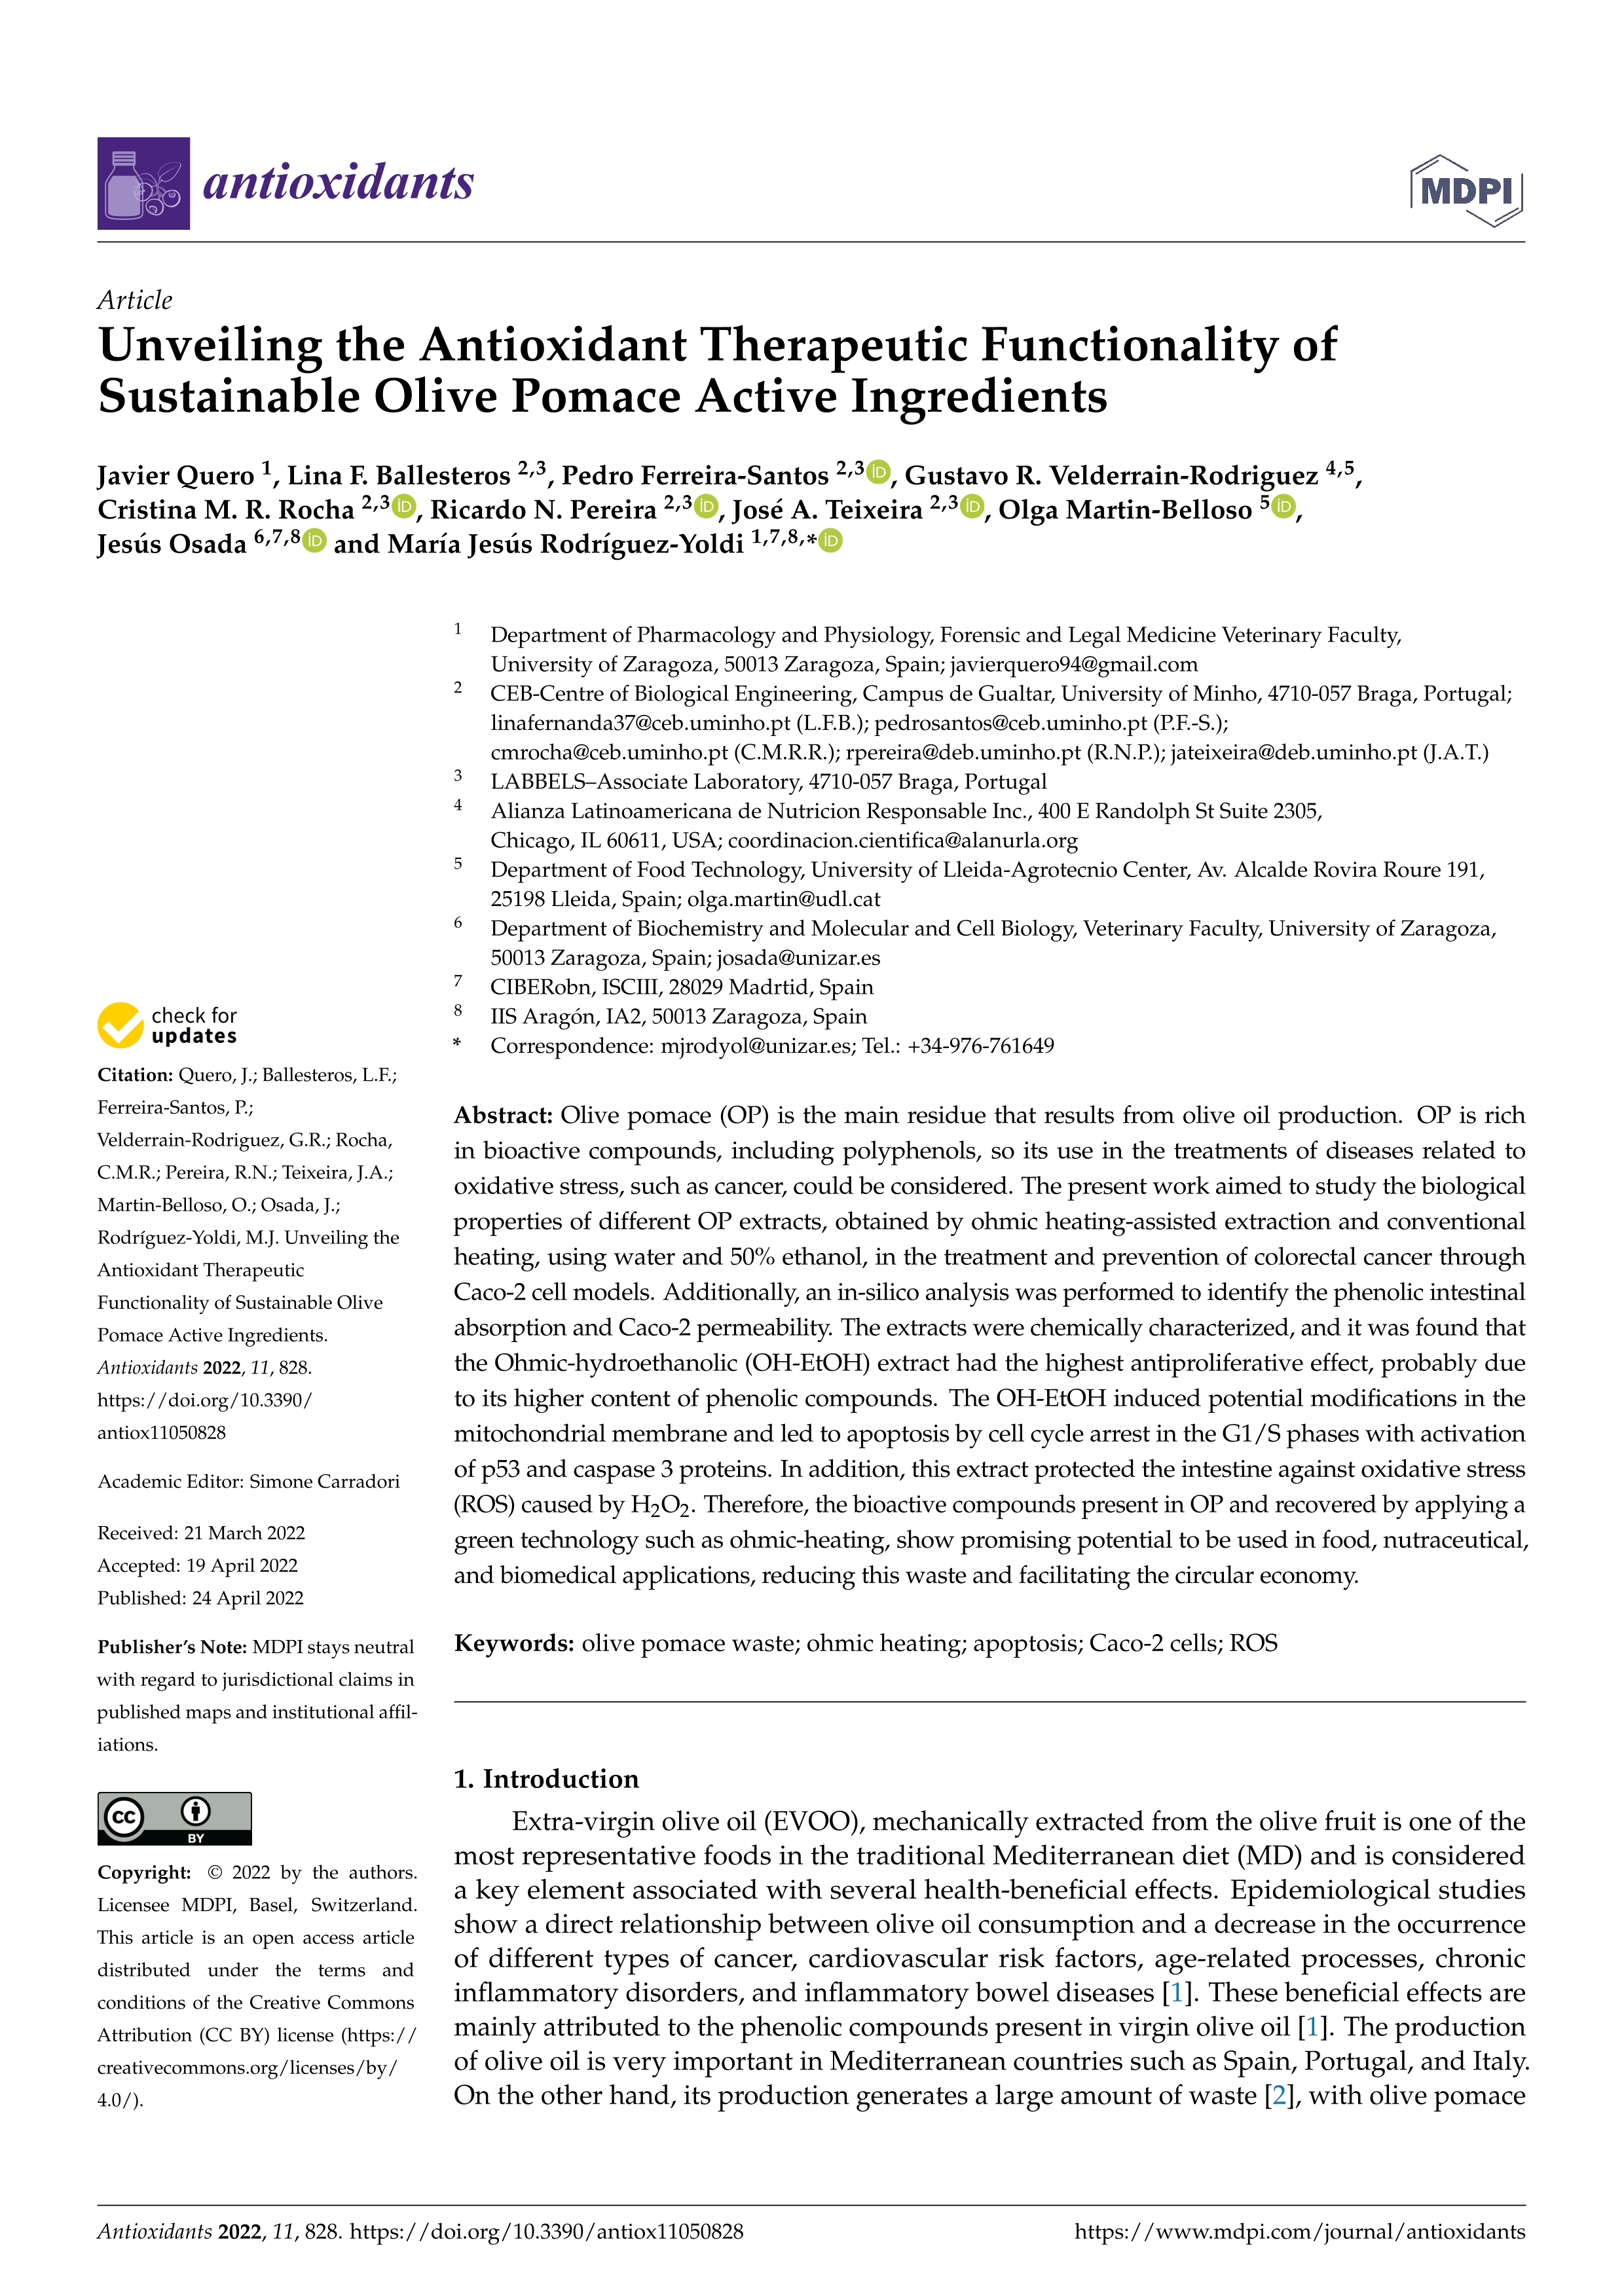 Unveiling the Antioxidant Therapeutic Functionality of Sustainable Olive Pomace Active Ingredients